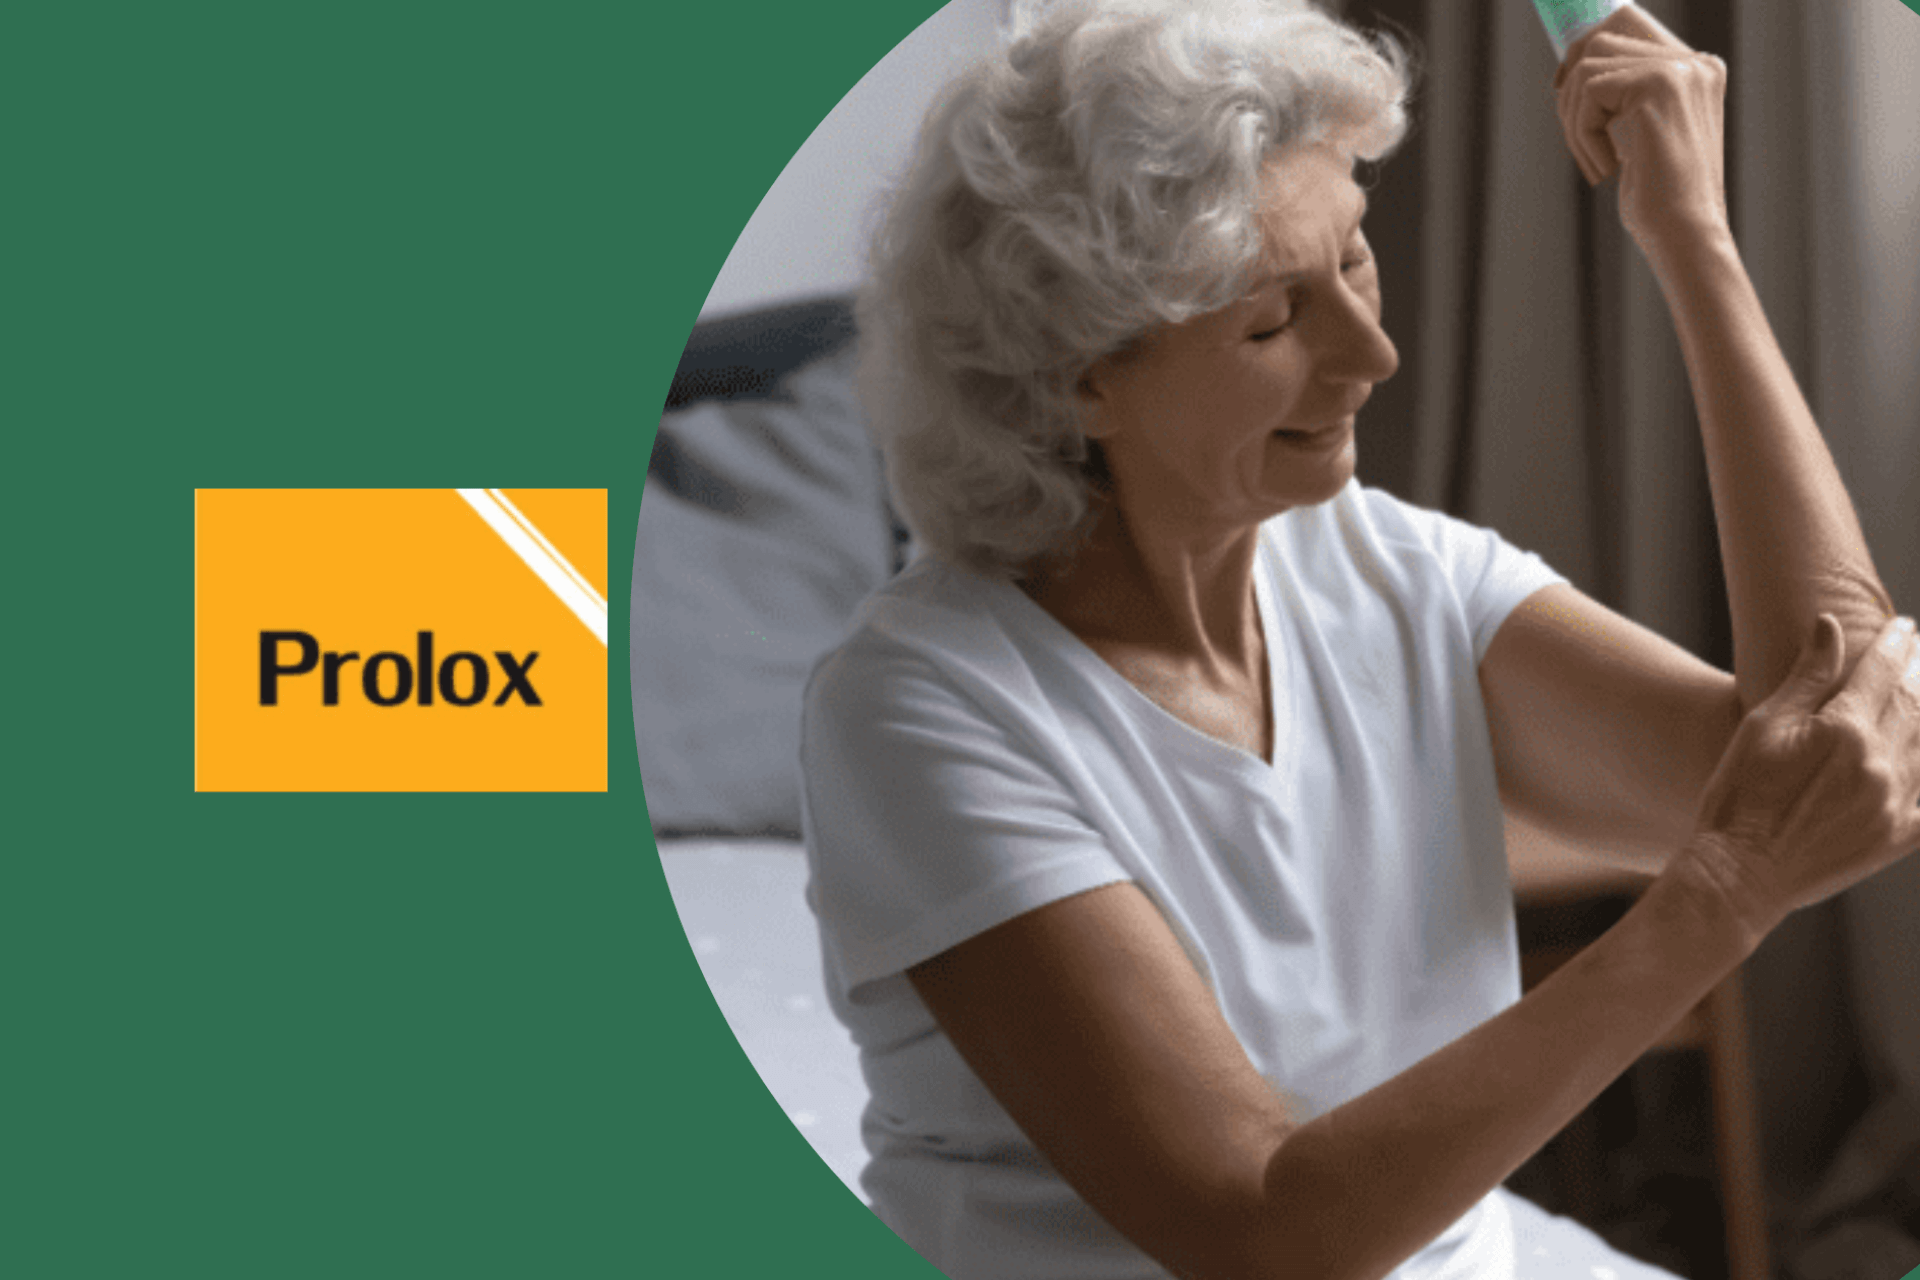 Prolox and the Science Behind the Development